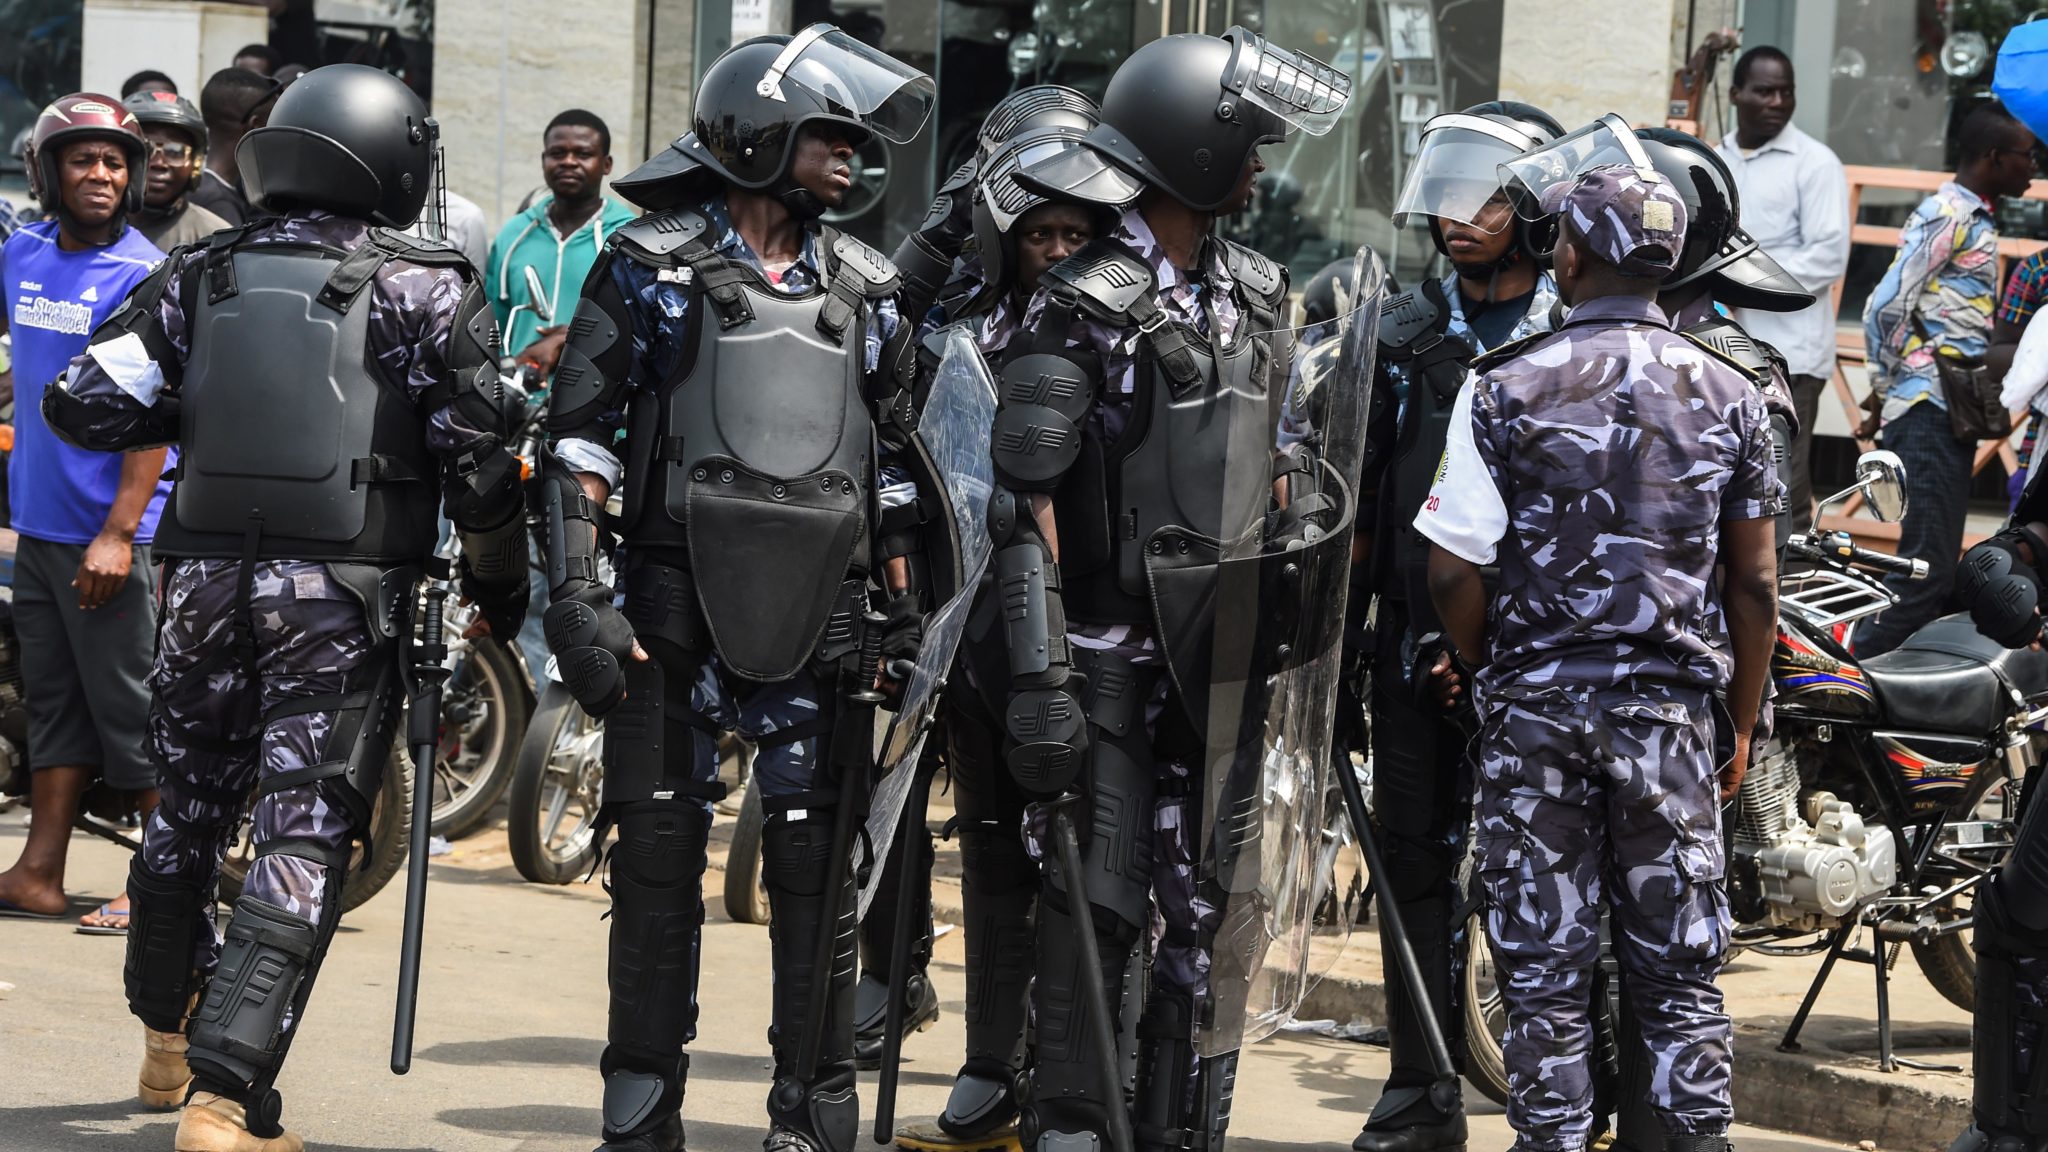 Police scatter Togo opposition event amid tensions